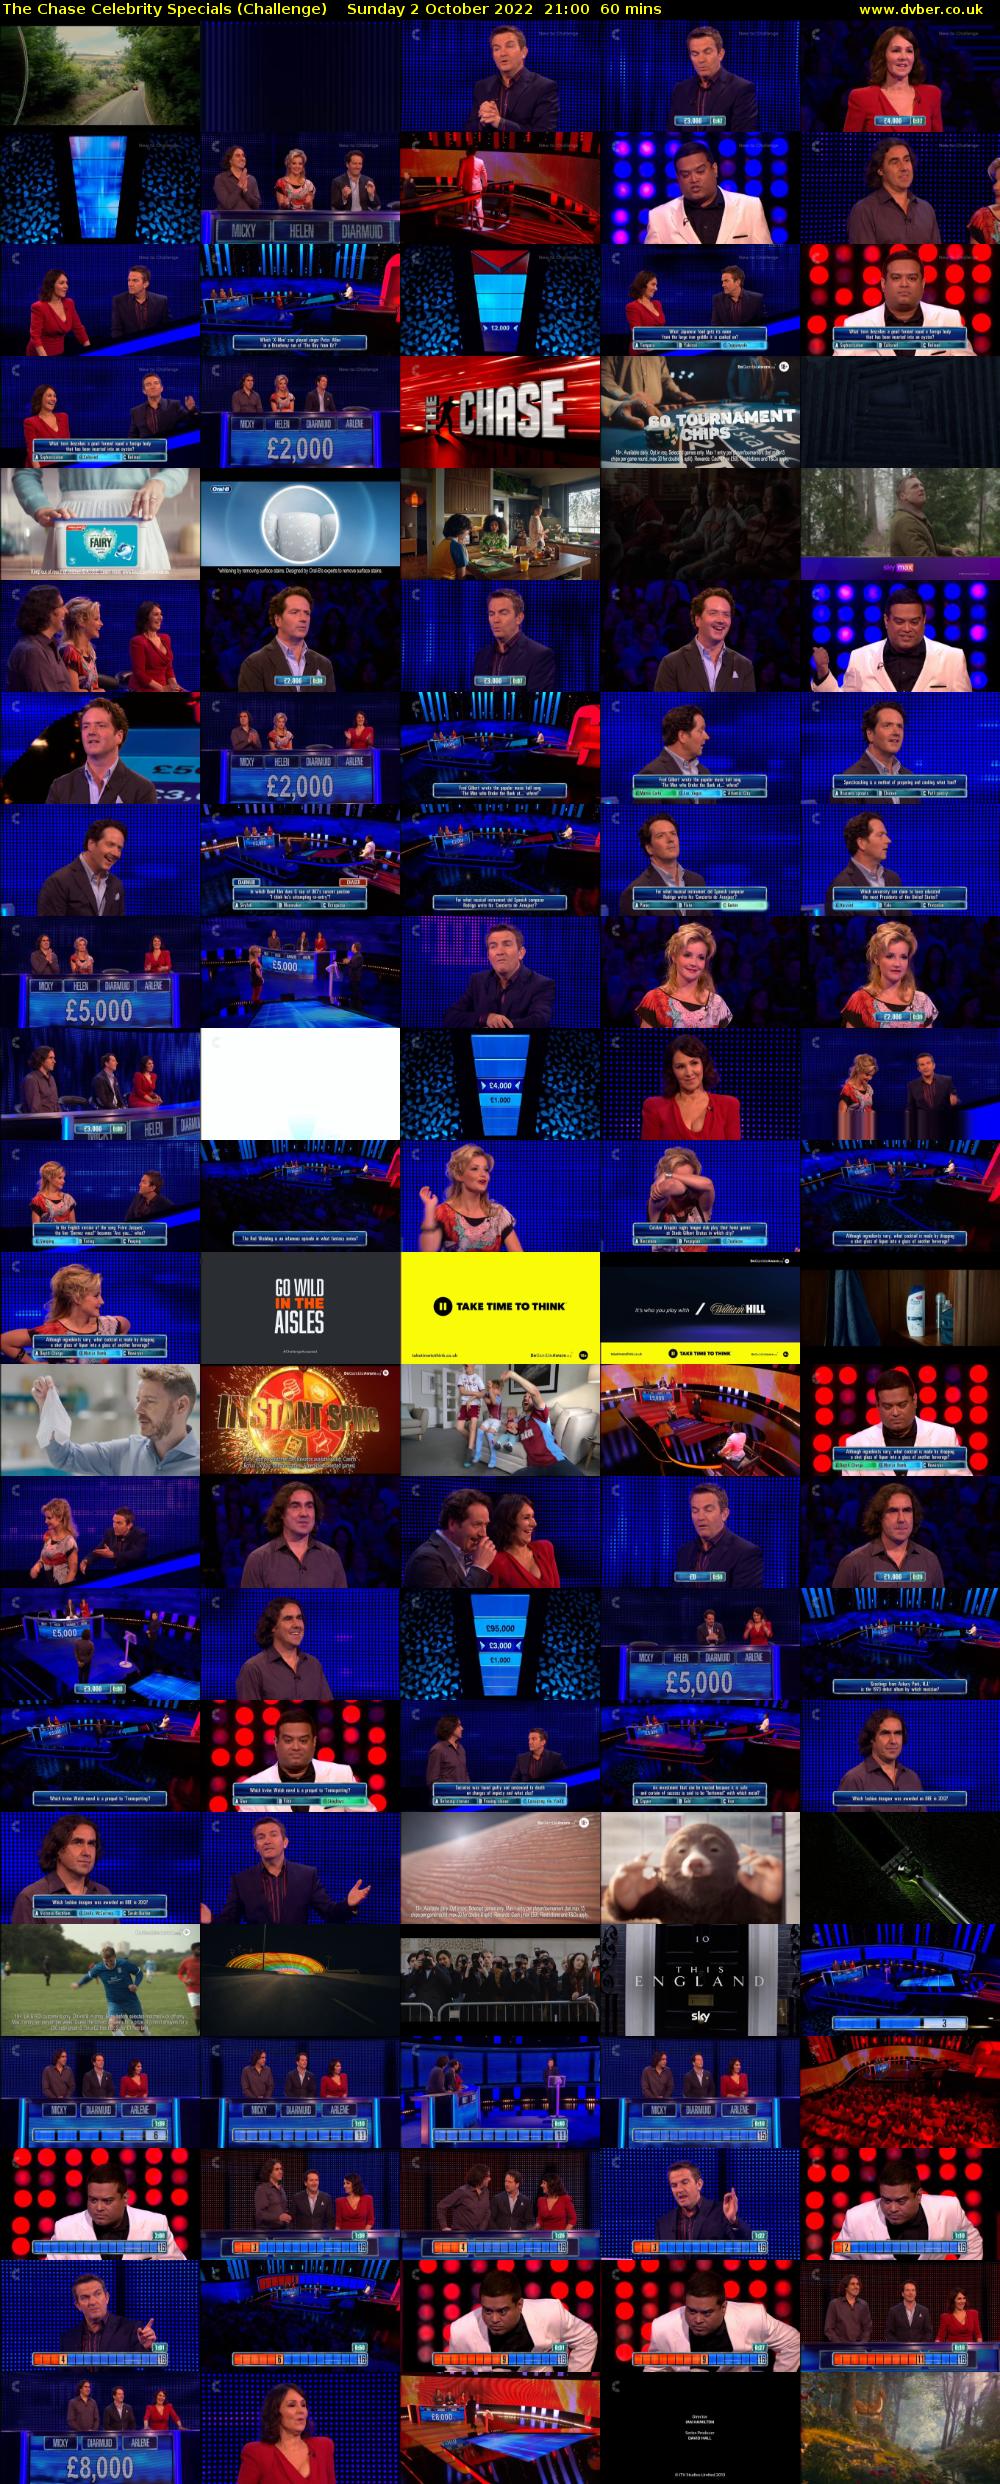 The Chase Celebrity Specials (Challenge) Sunday 2 October 2022 21:00 - 22:00